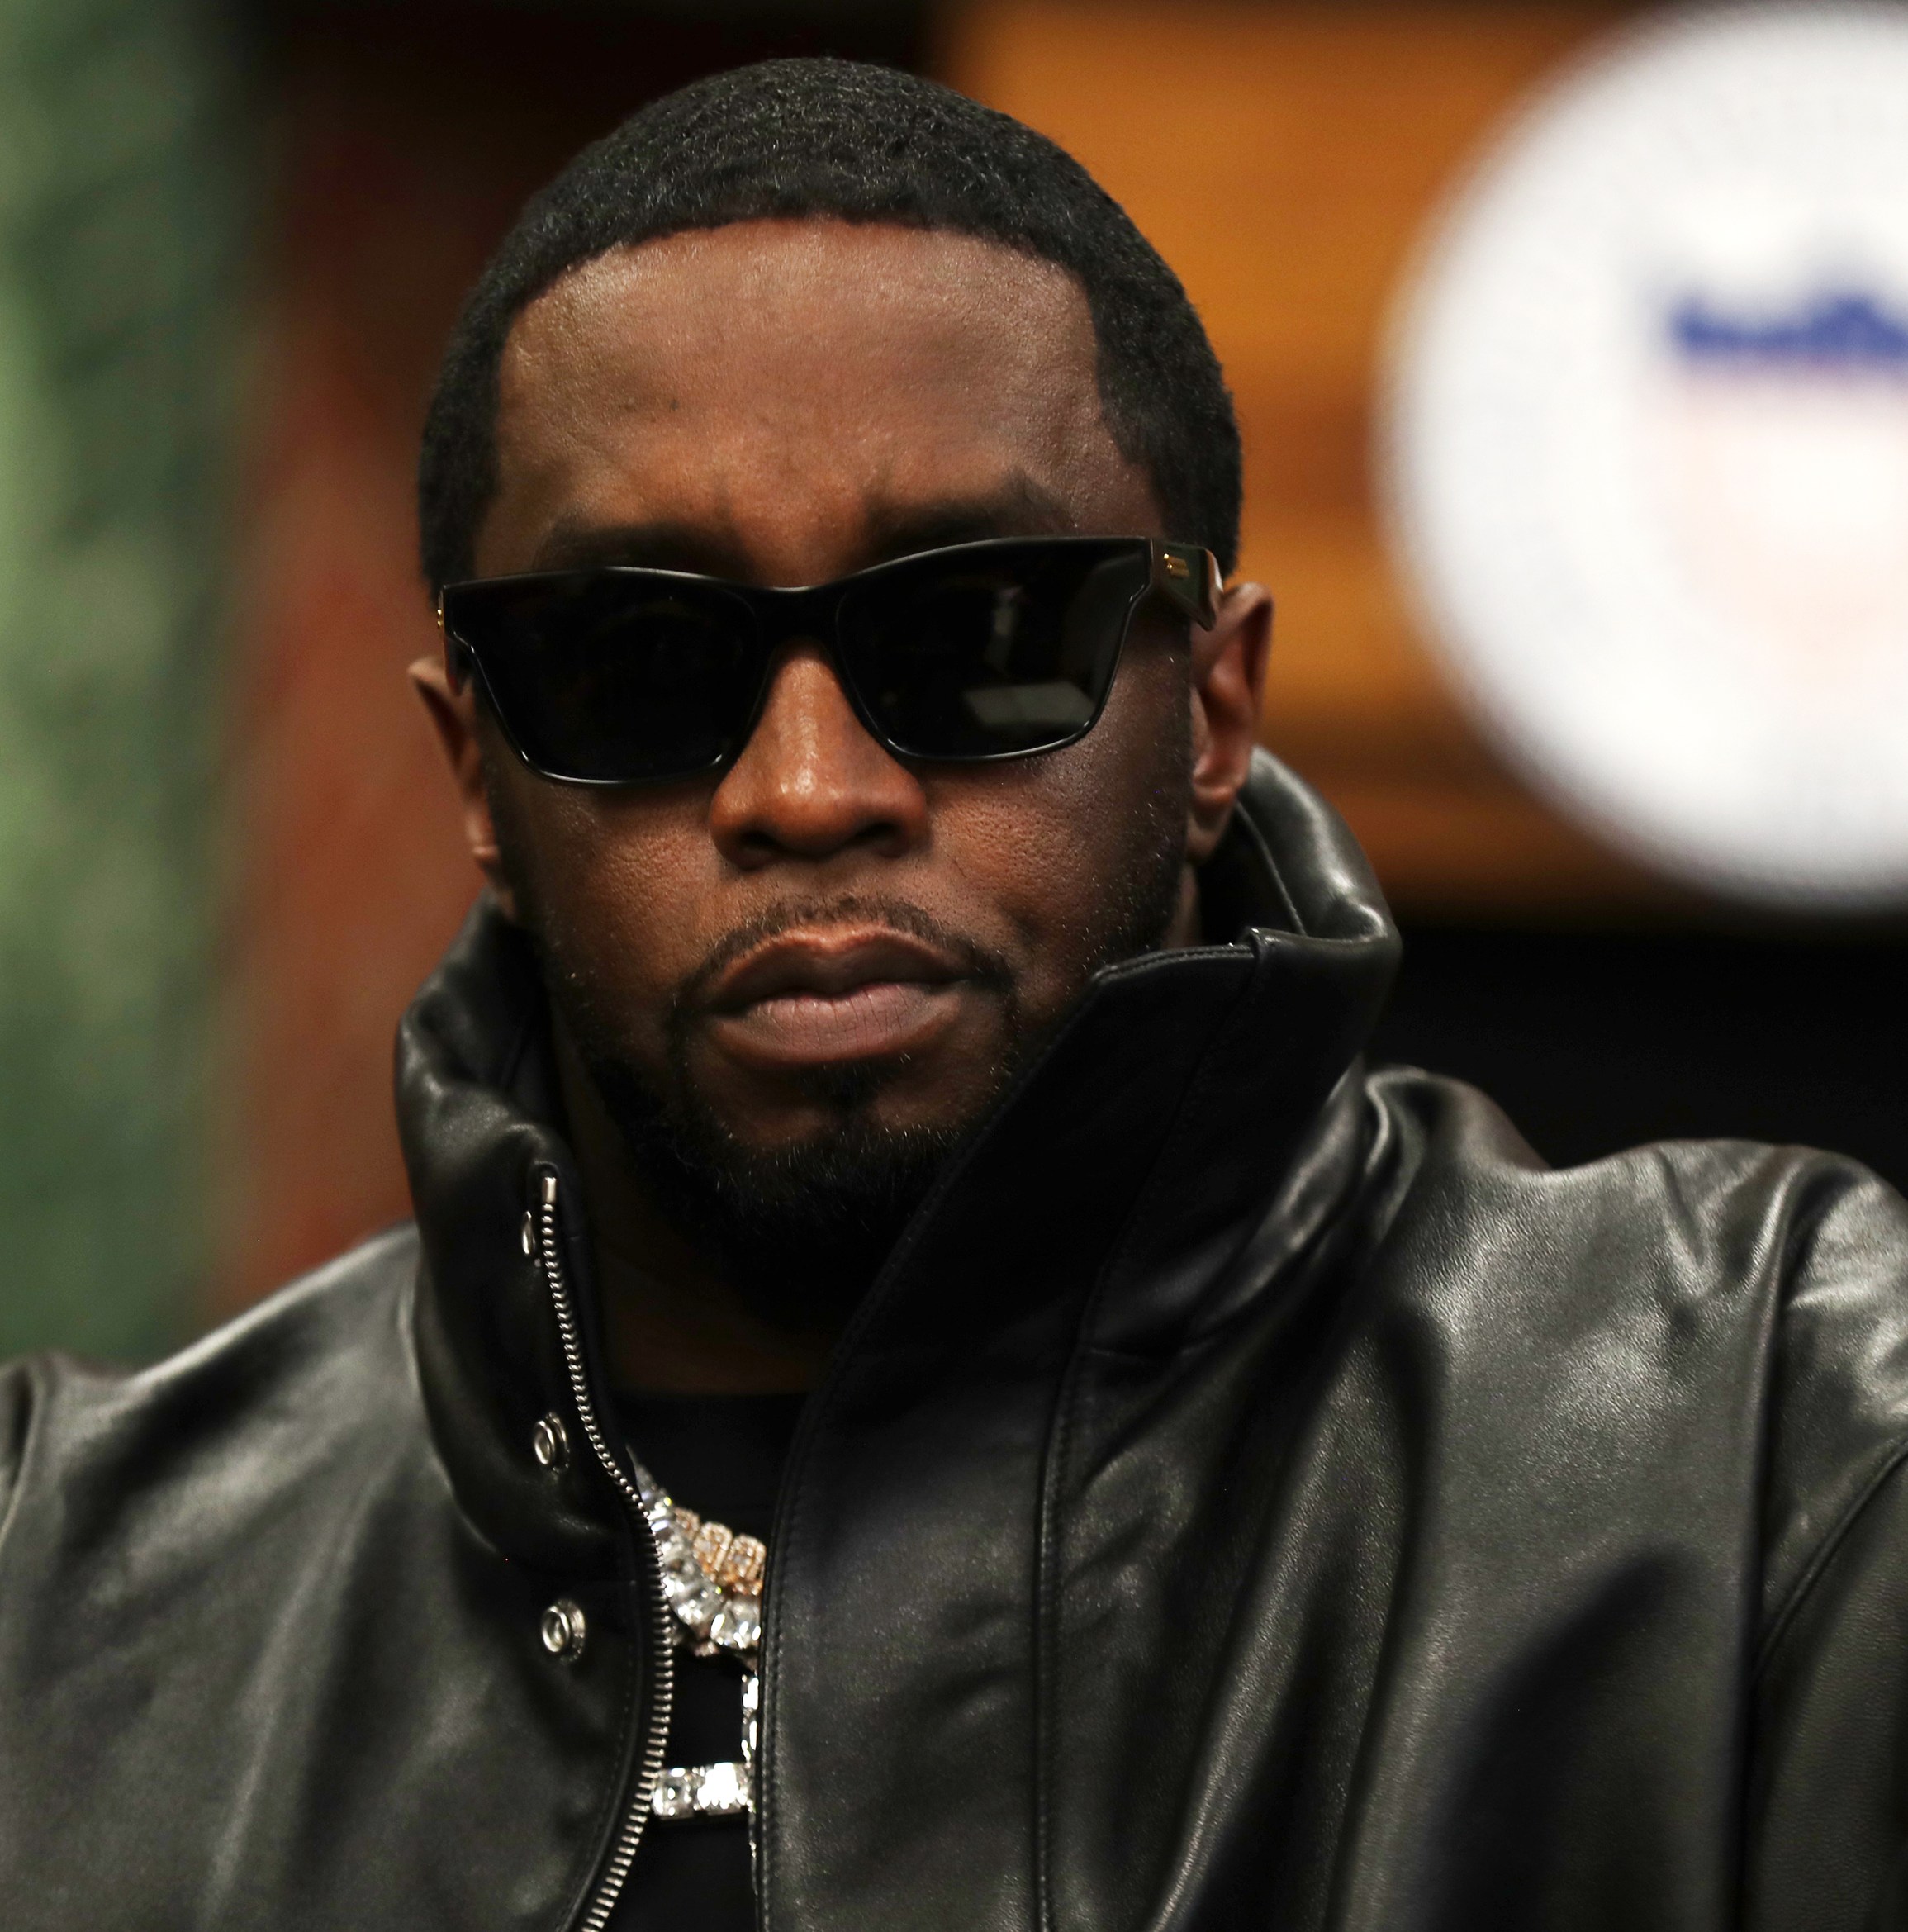 The video where Diddy attacks Cassie — and the allegations against him — explained